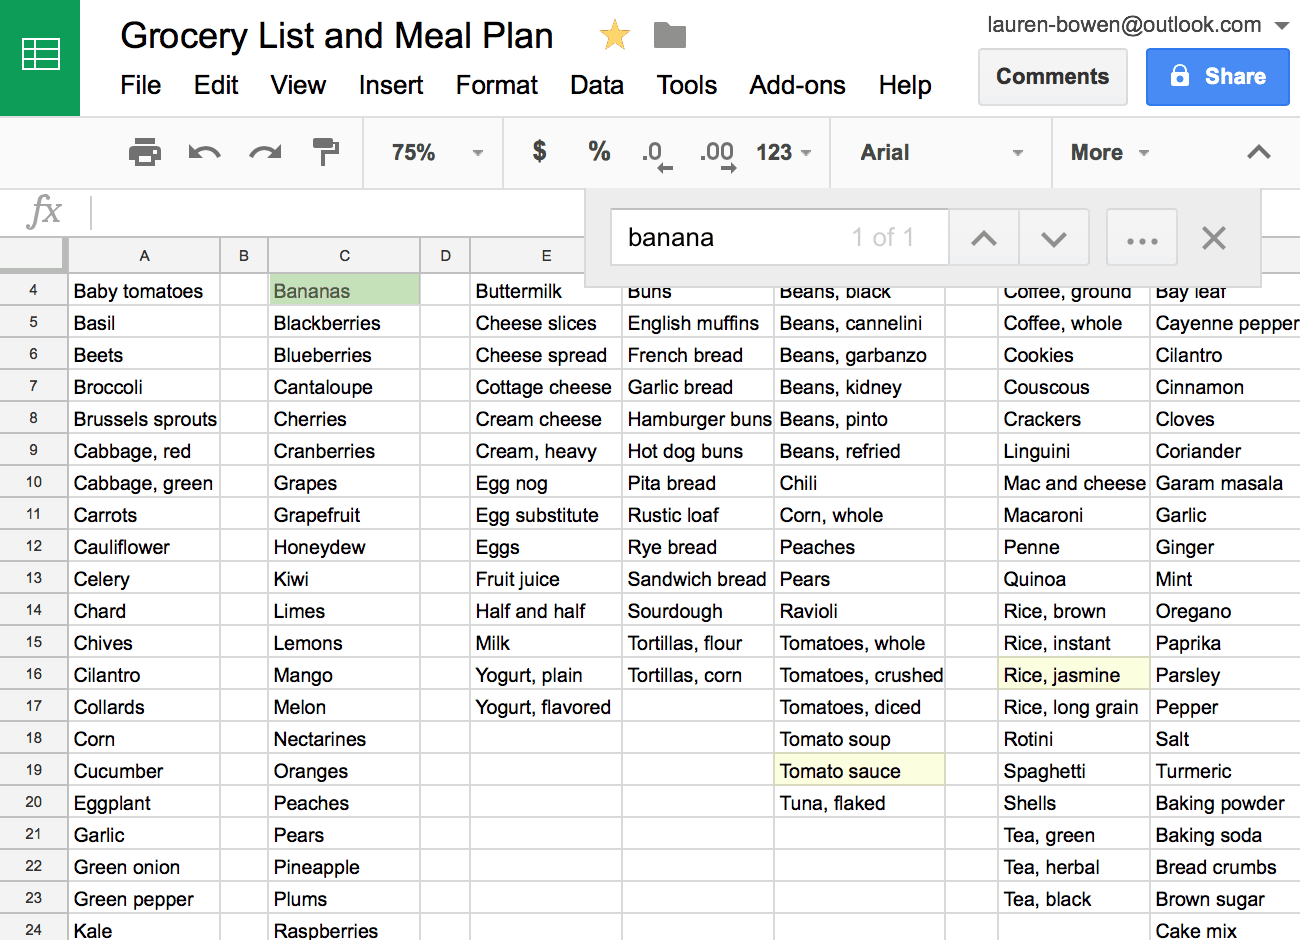 How I Use Google Sheets for Grocery Shopping and Meal Planning